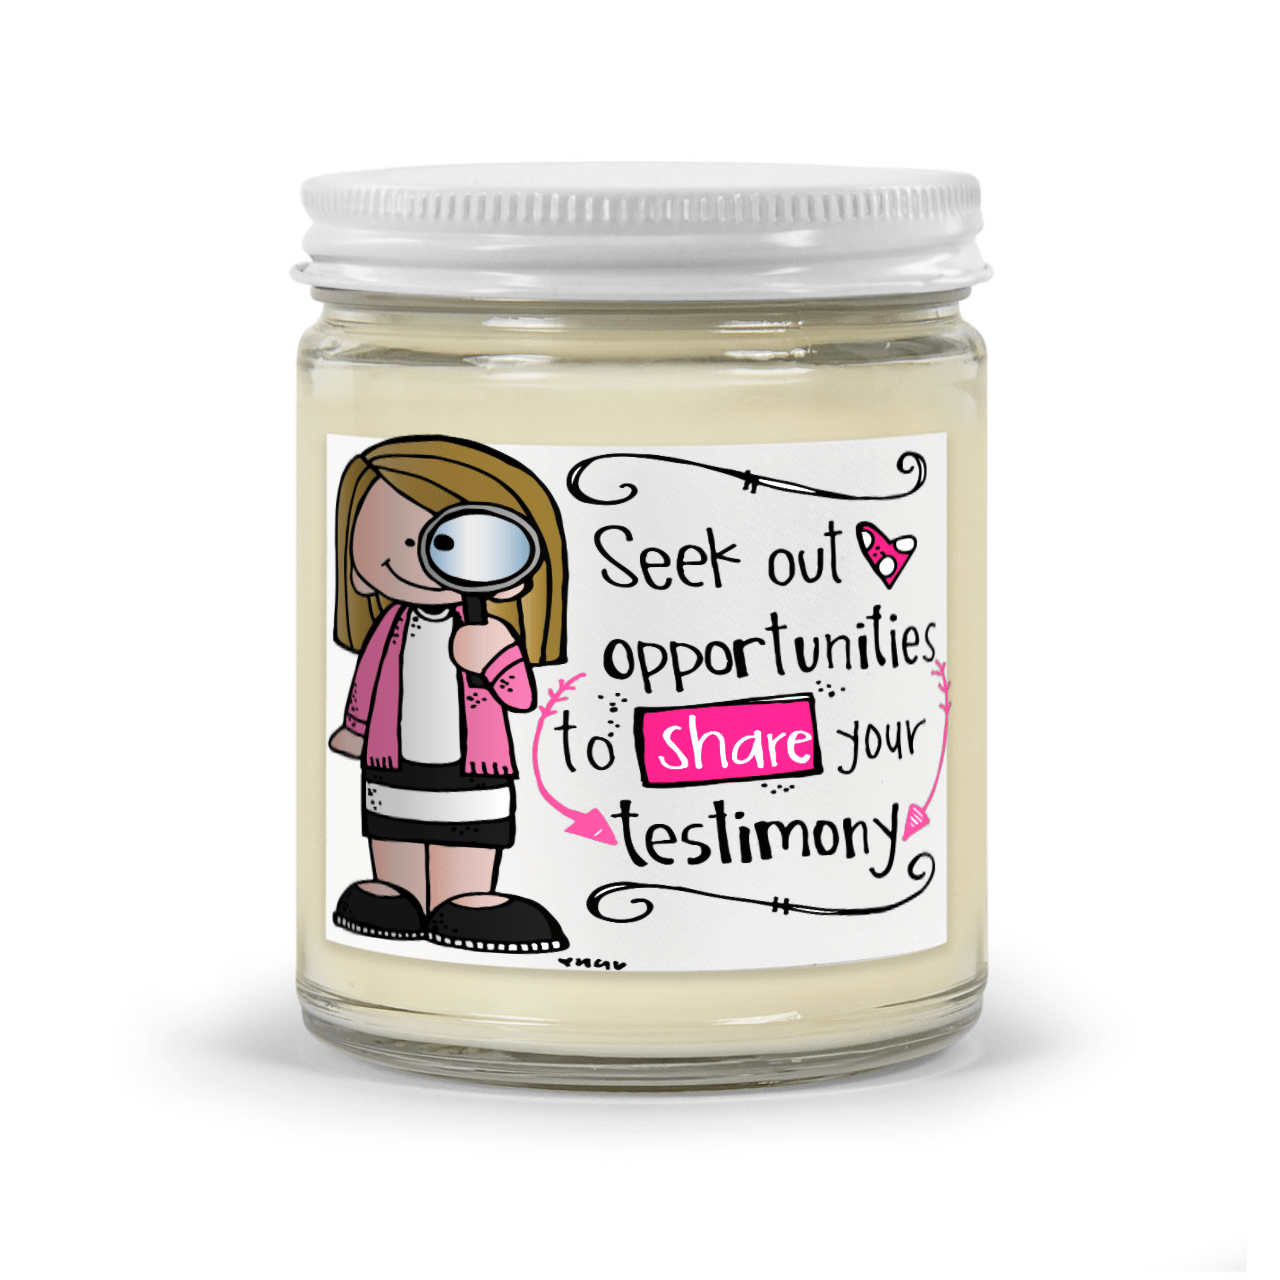 Share Your Testimony Mason Jar Soy Candle Candle Candle Builders   